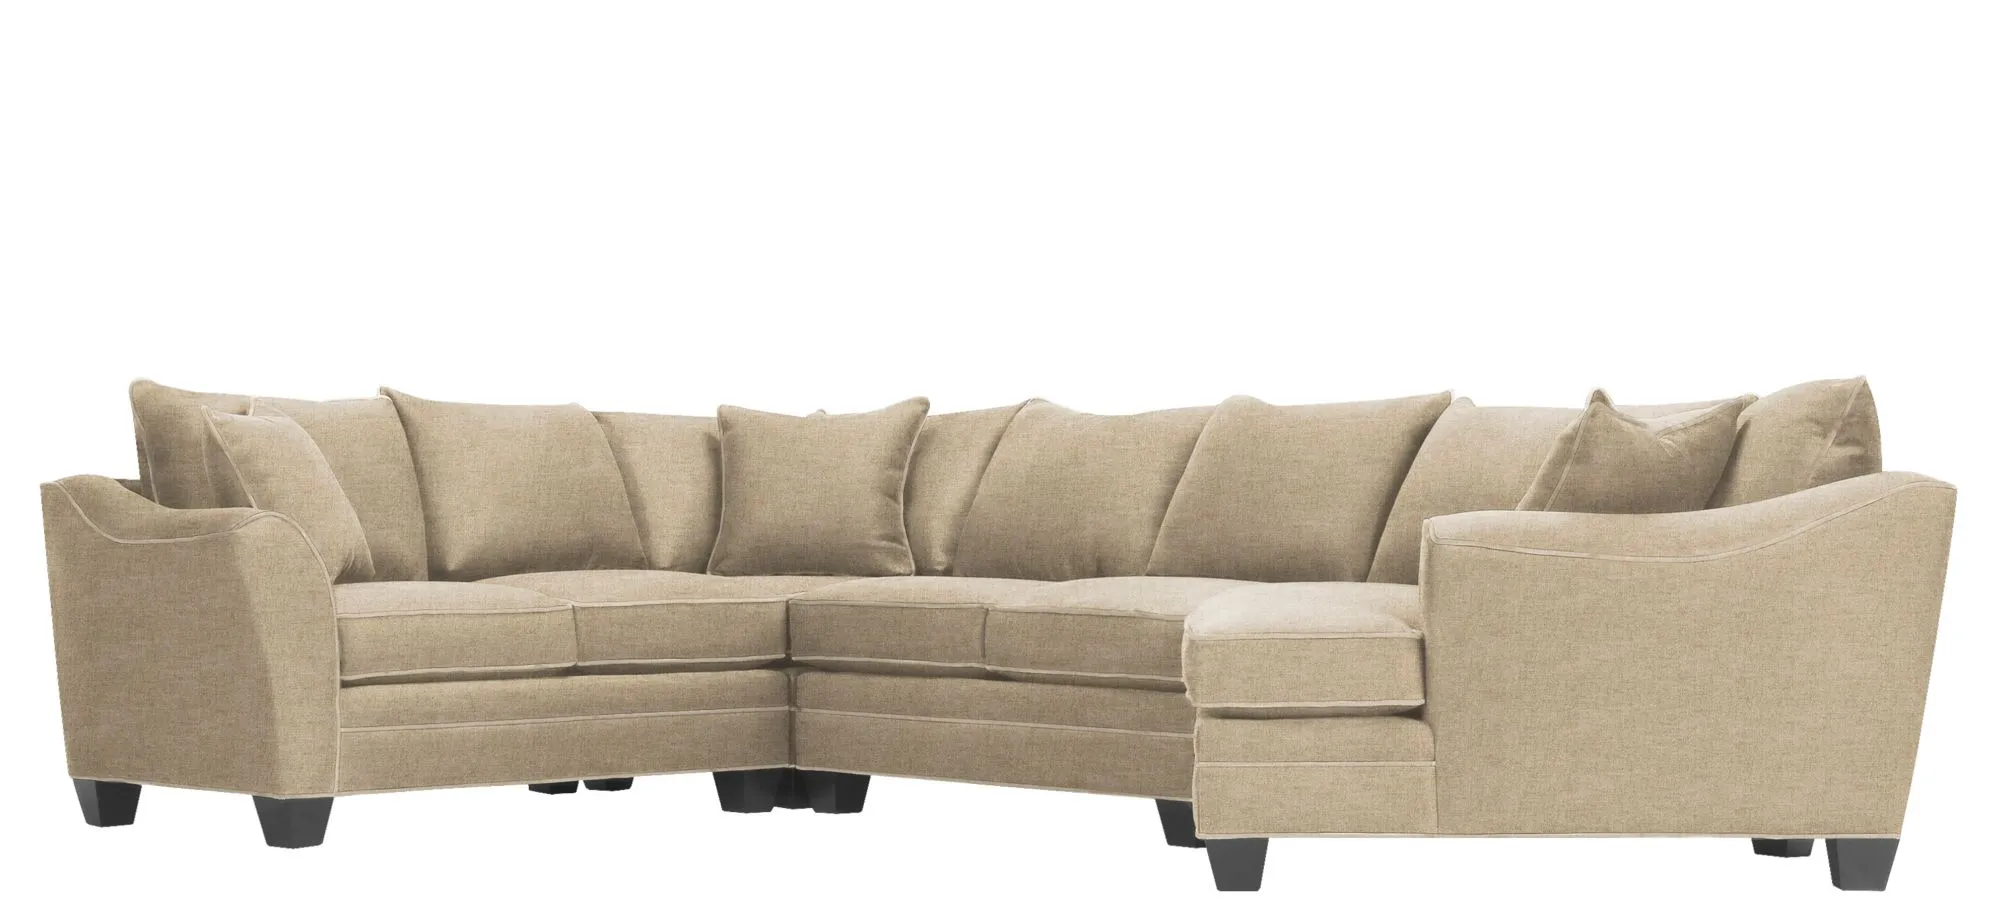 Foresthill 4-pc. Right Hand Cuddler with Loveseat Sectional Sofa in Santa Rosa Linen by H.M. Richards